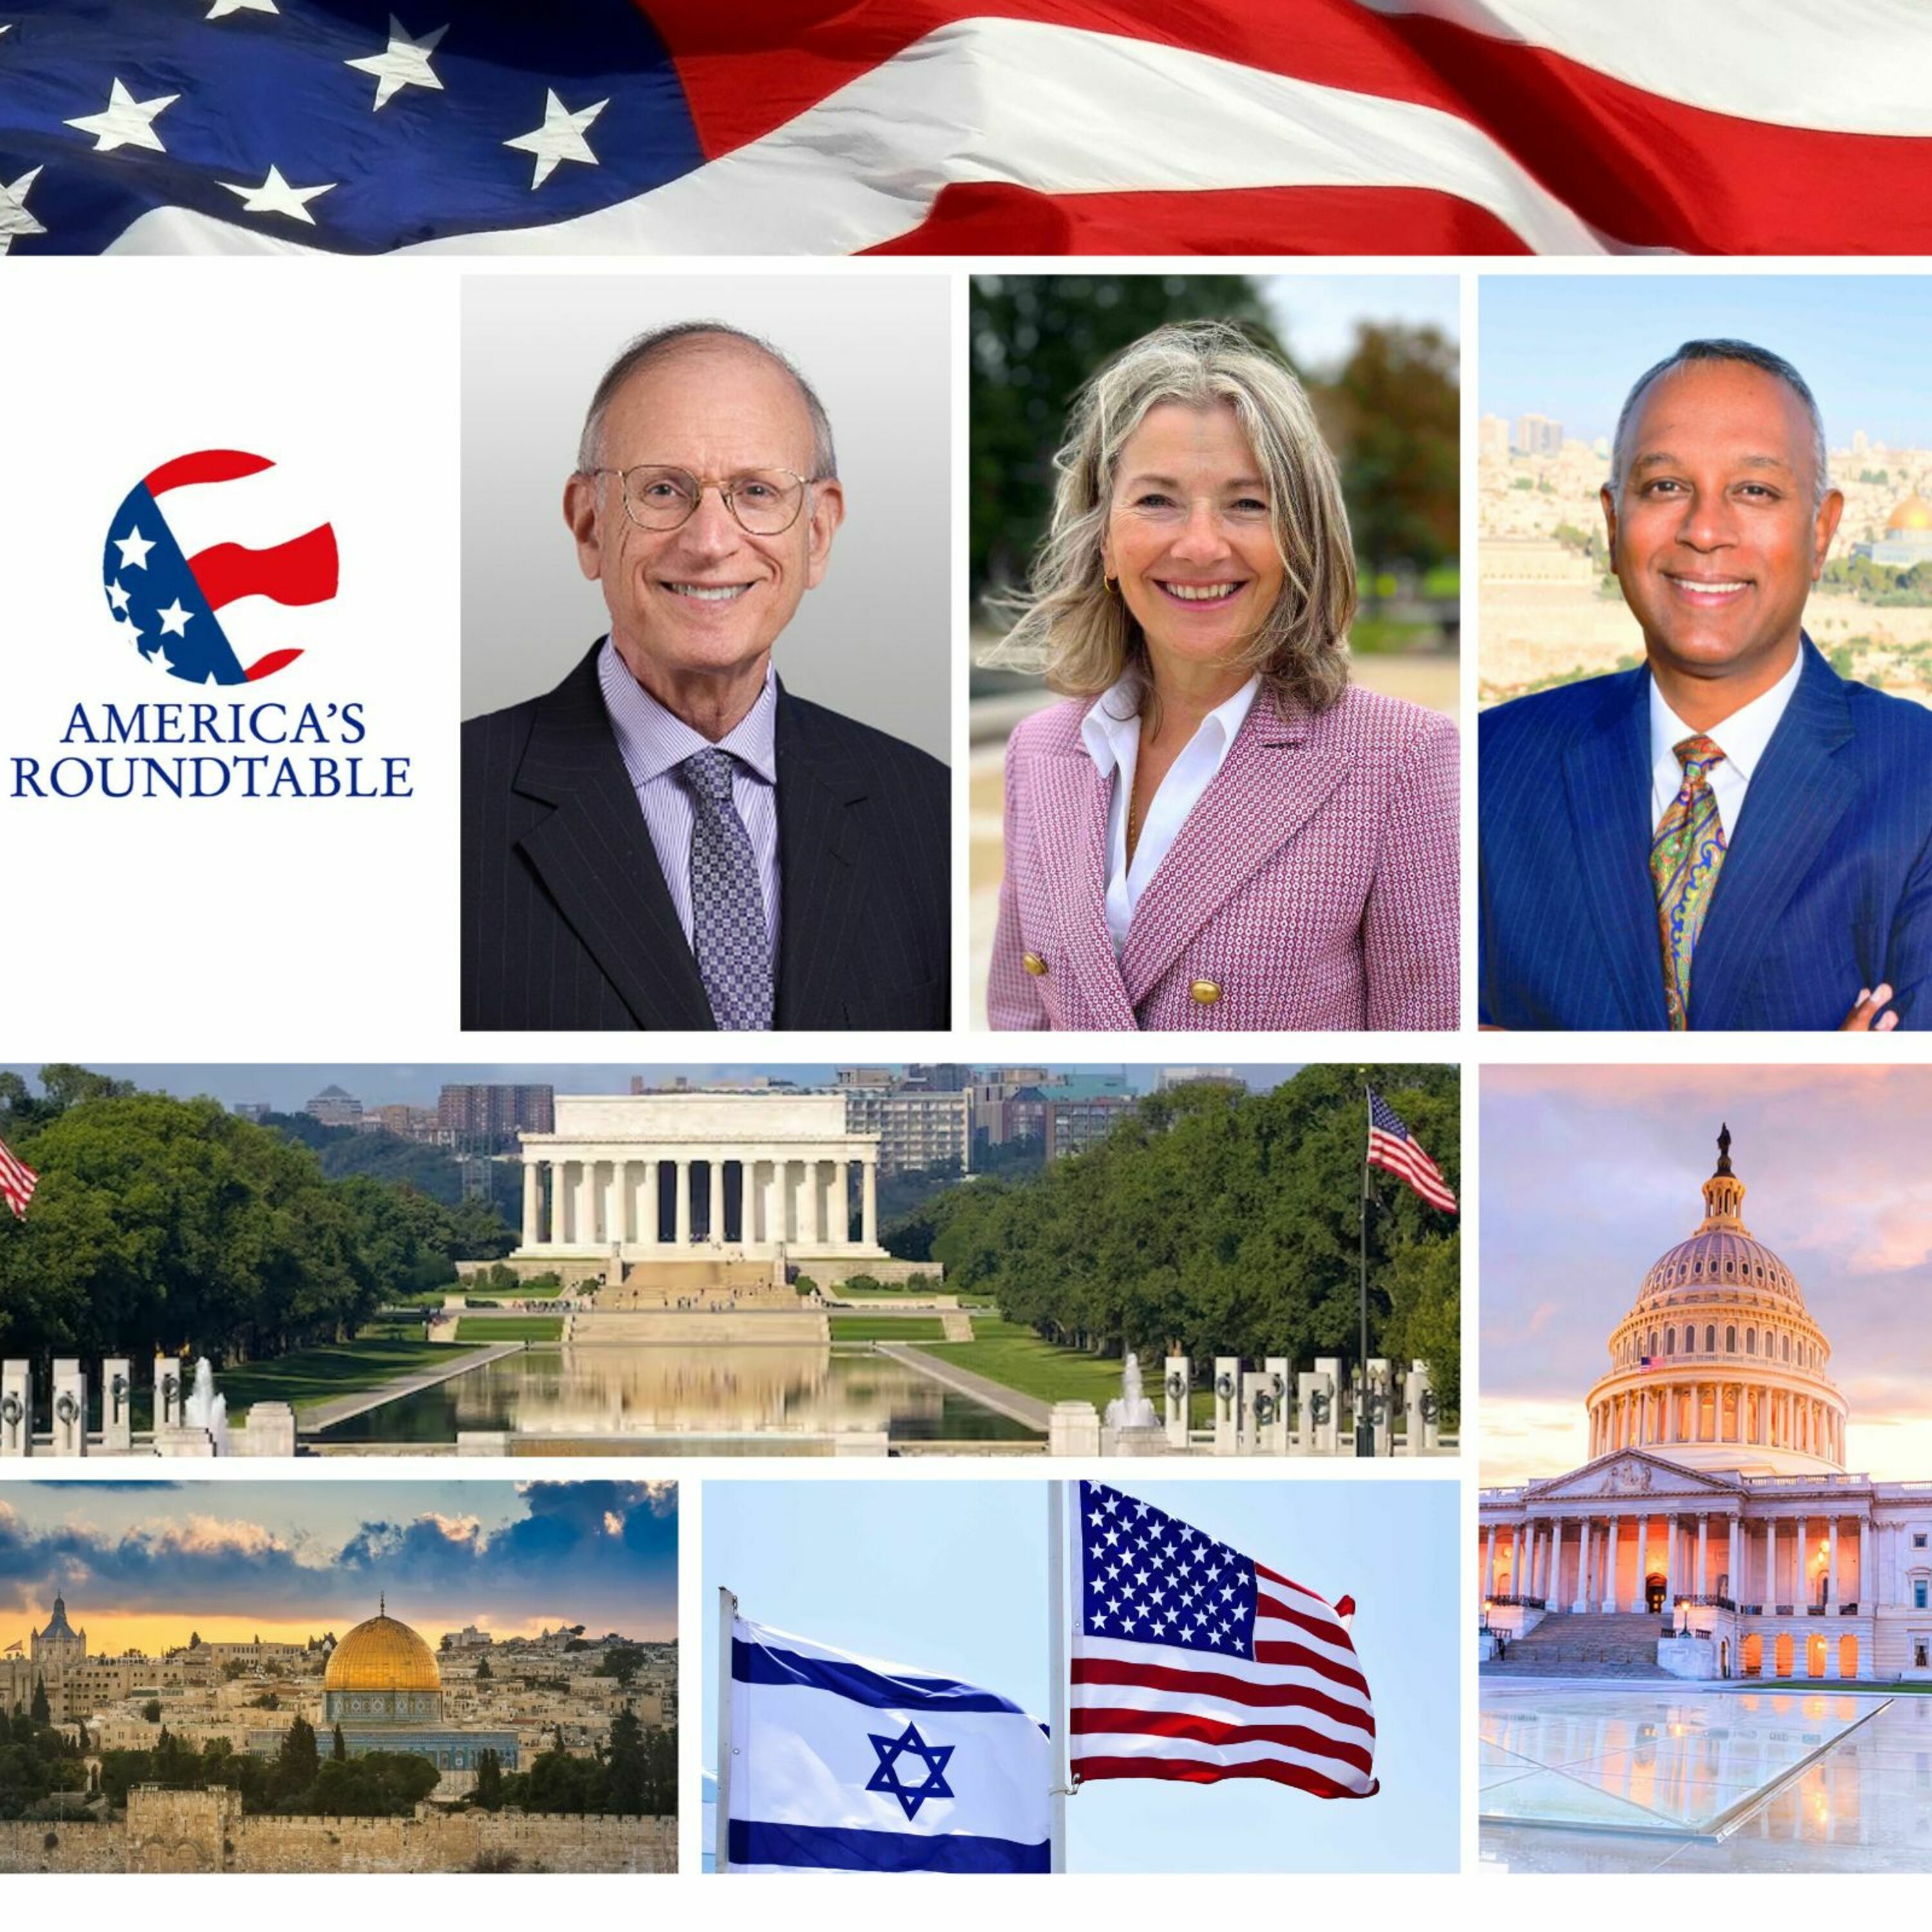 America's Roundtable with Ambassador Stuart E. Eizenstat | Holocaust Justice | Addressing the Surge in Anti-Semitism in America | The Significance of America's Leadership on the World Stage | The Future of Israel and the Middle East | New Book: "The Art of Diplomacy"